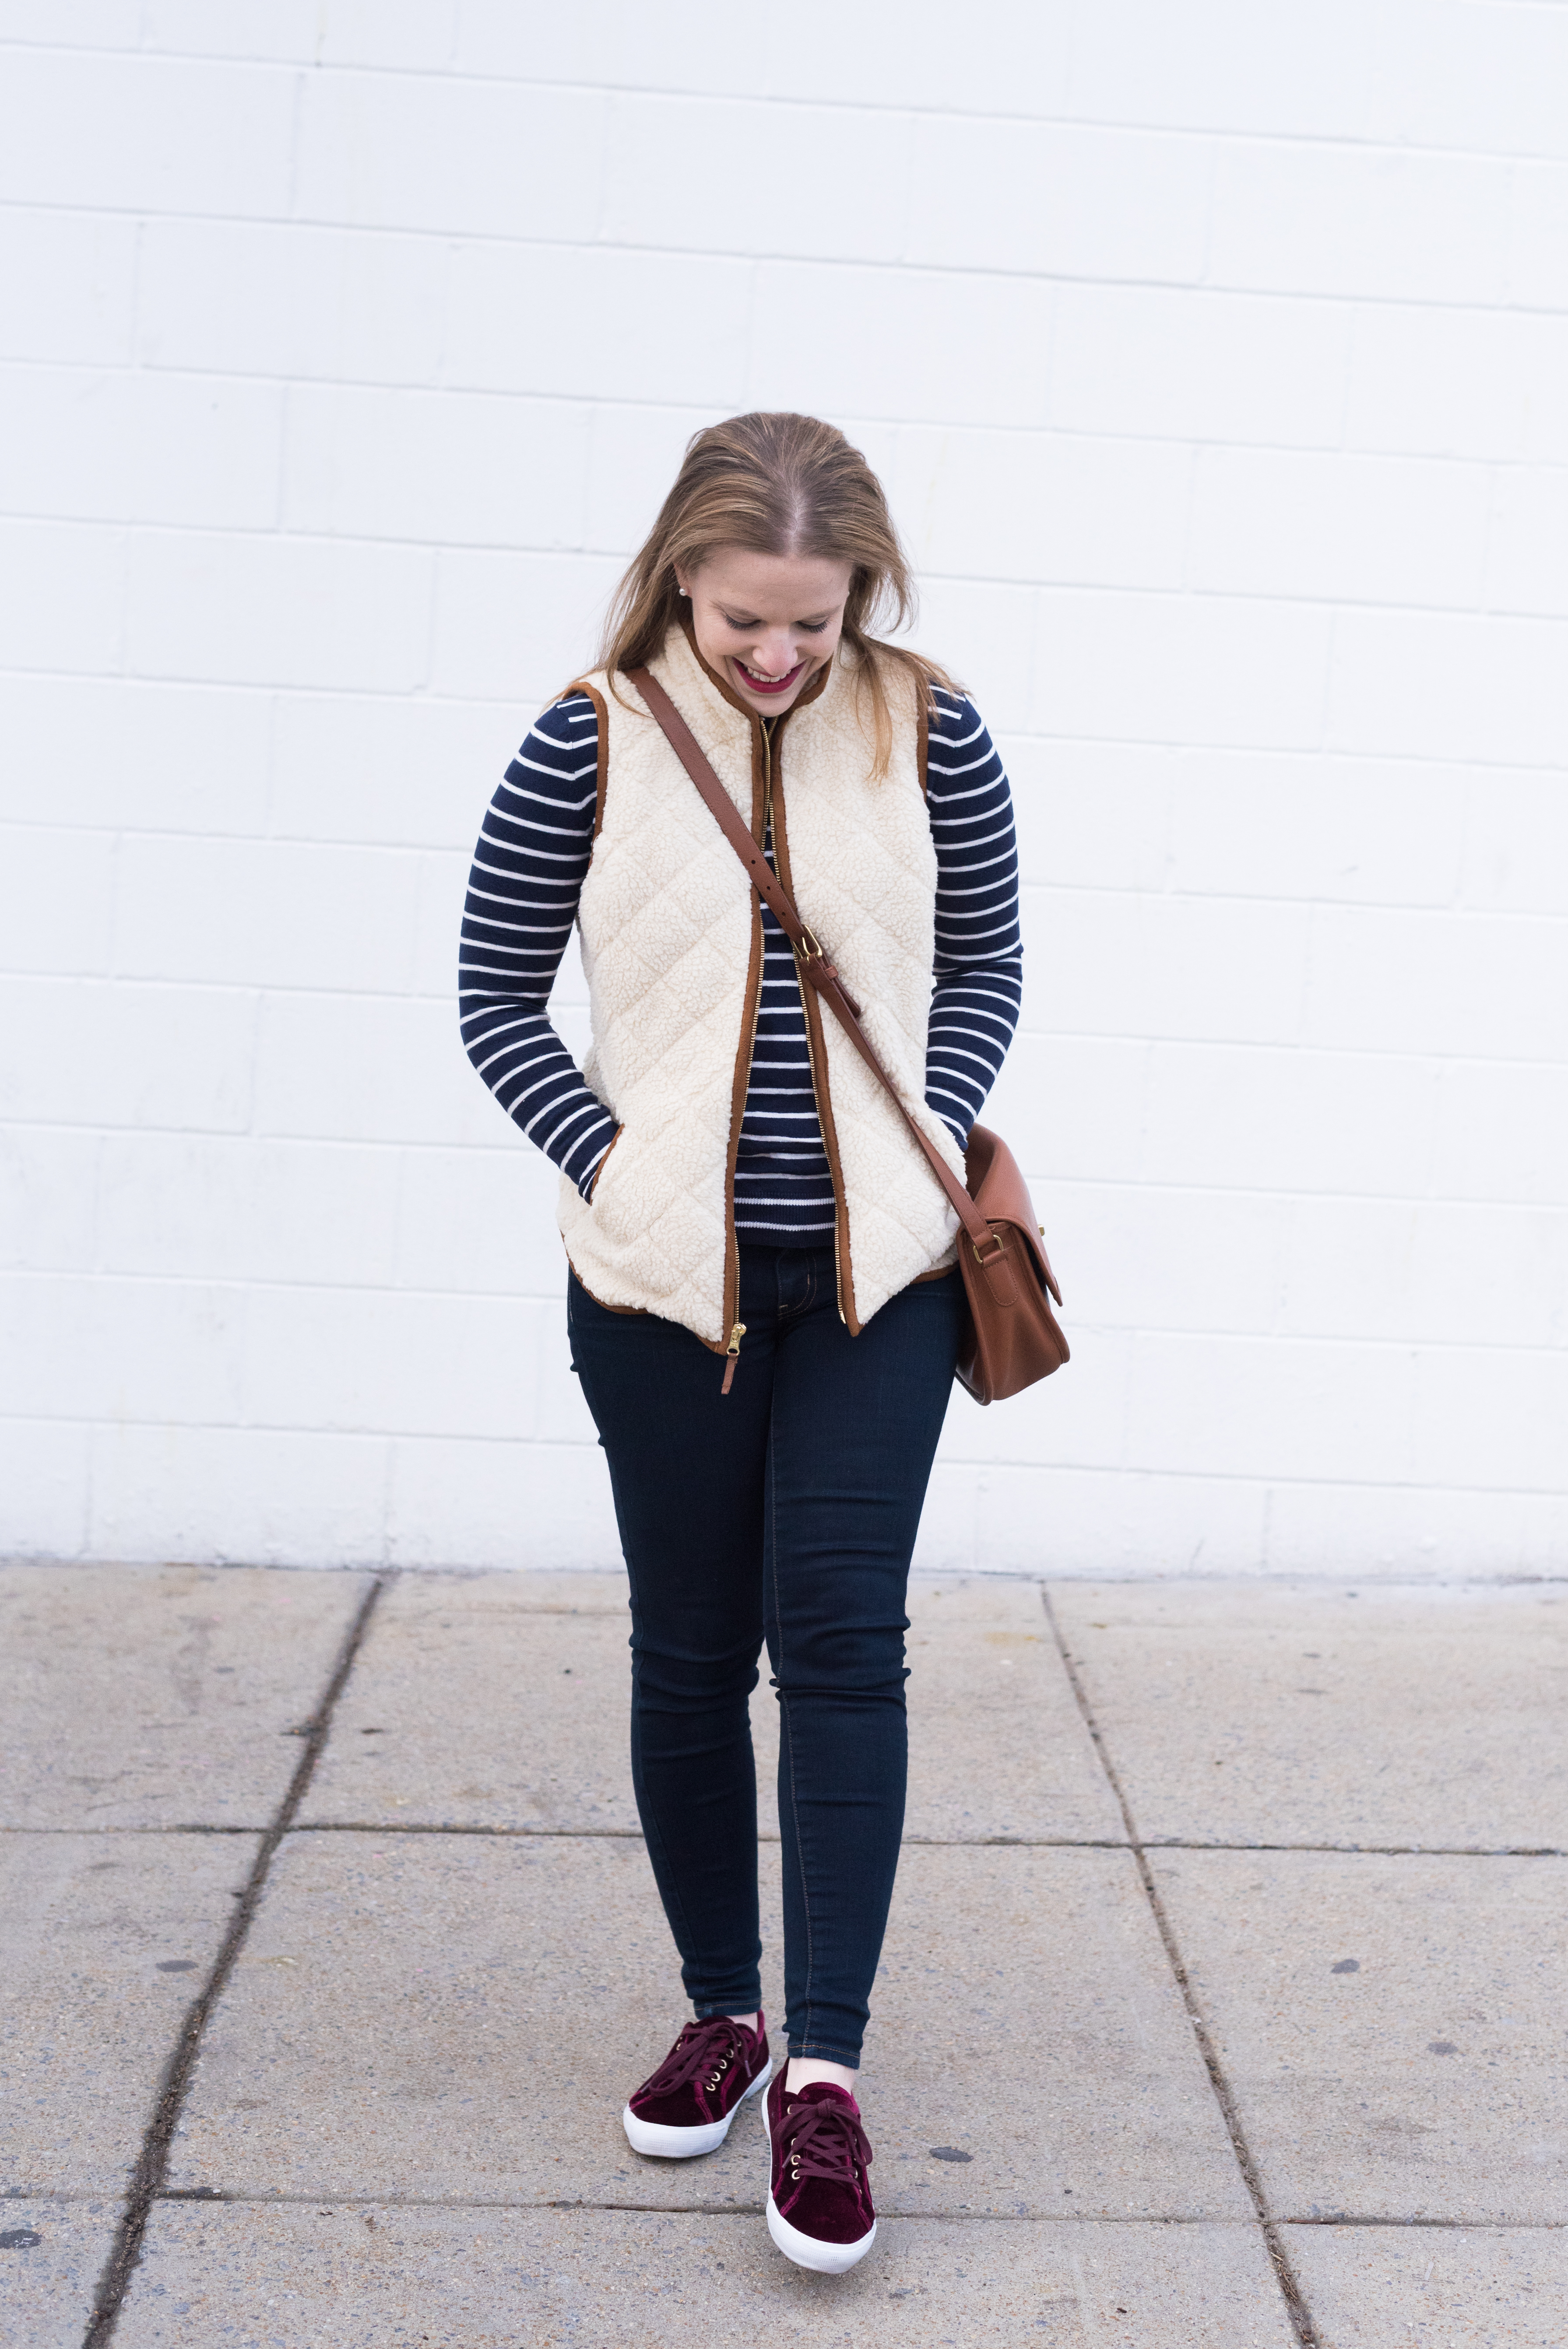 What I Learned From You | Something Good, @danaerinw , women, fashion, clothing, style, clothes, fall fashion, fall clothing, denim, skinny jeans, red sneakers, sherpa vest, vest, striped sweater, navy sweater, crossbody bag